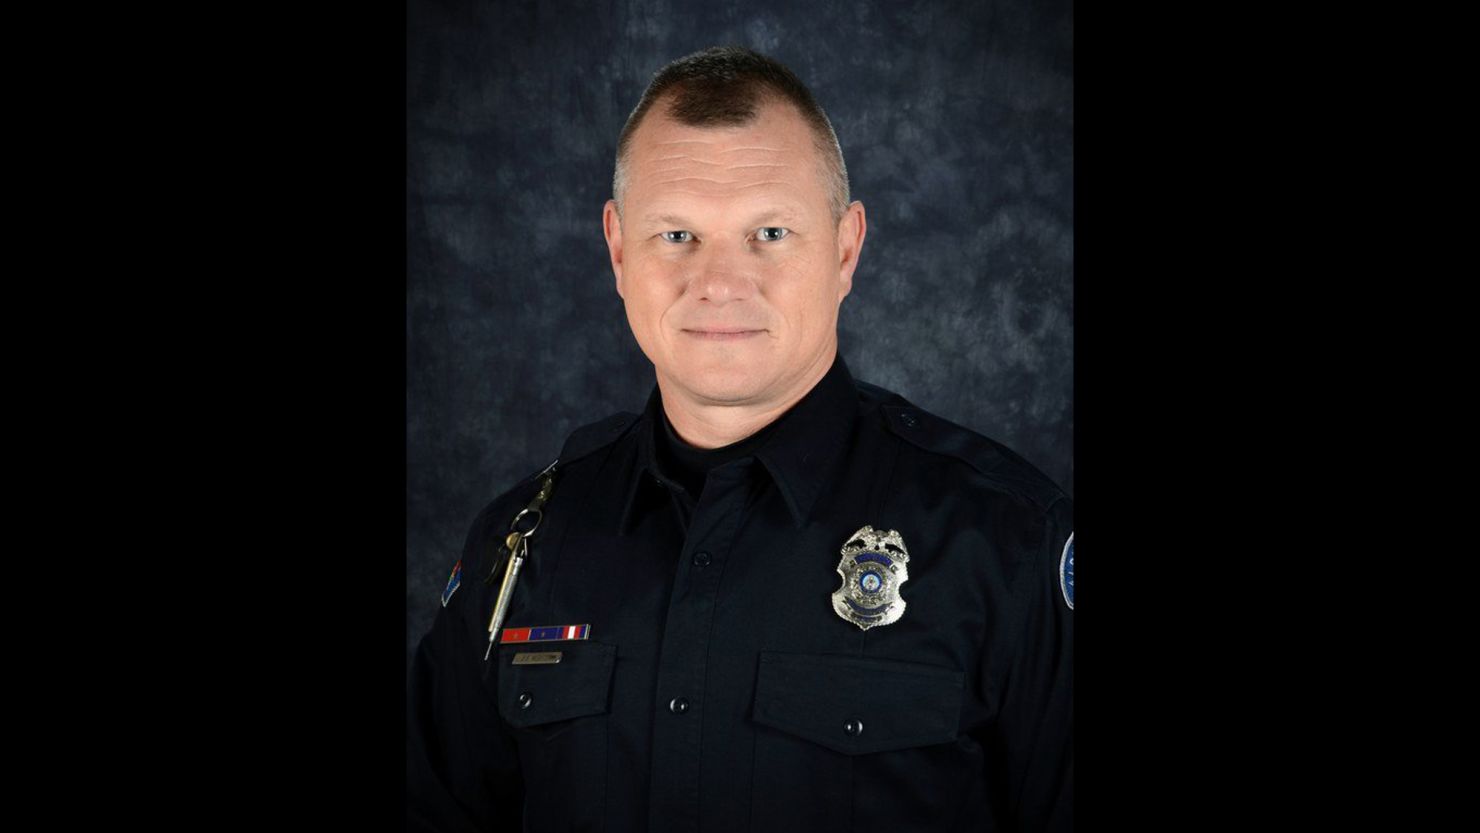 Officer Daniel Webster was a nearly nine-year veteran of the Albuquerque, New Mexico, Police Department.